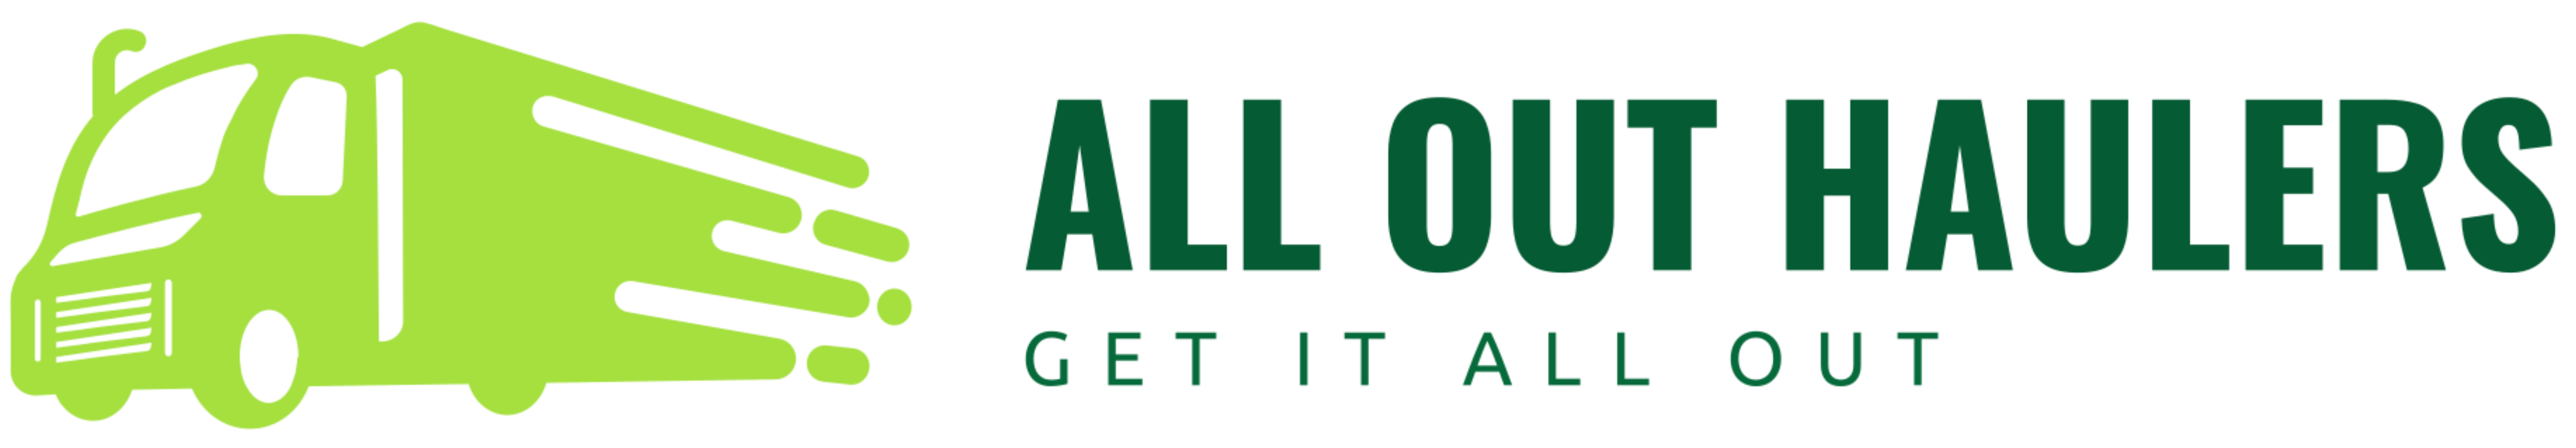 All out haulers logo